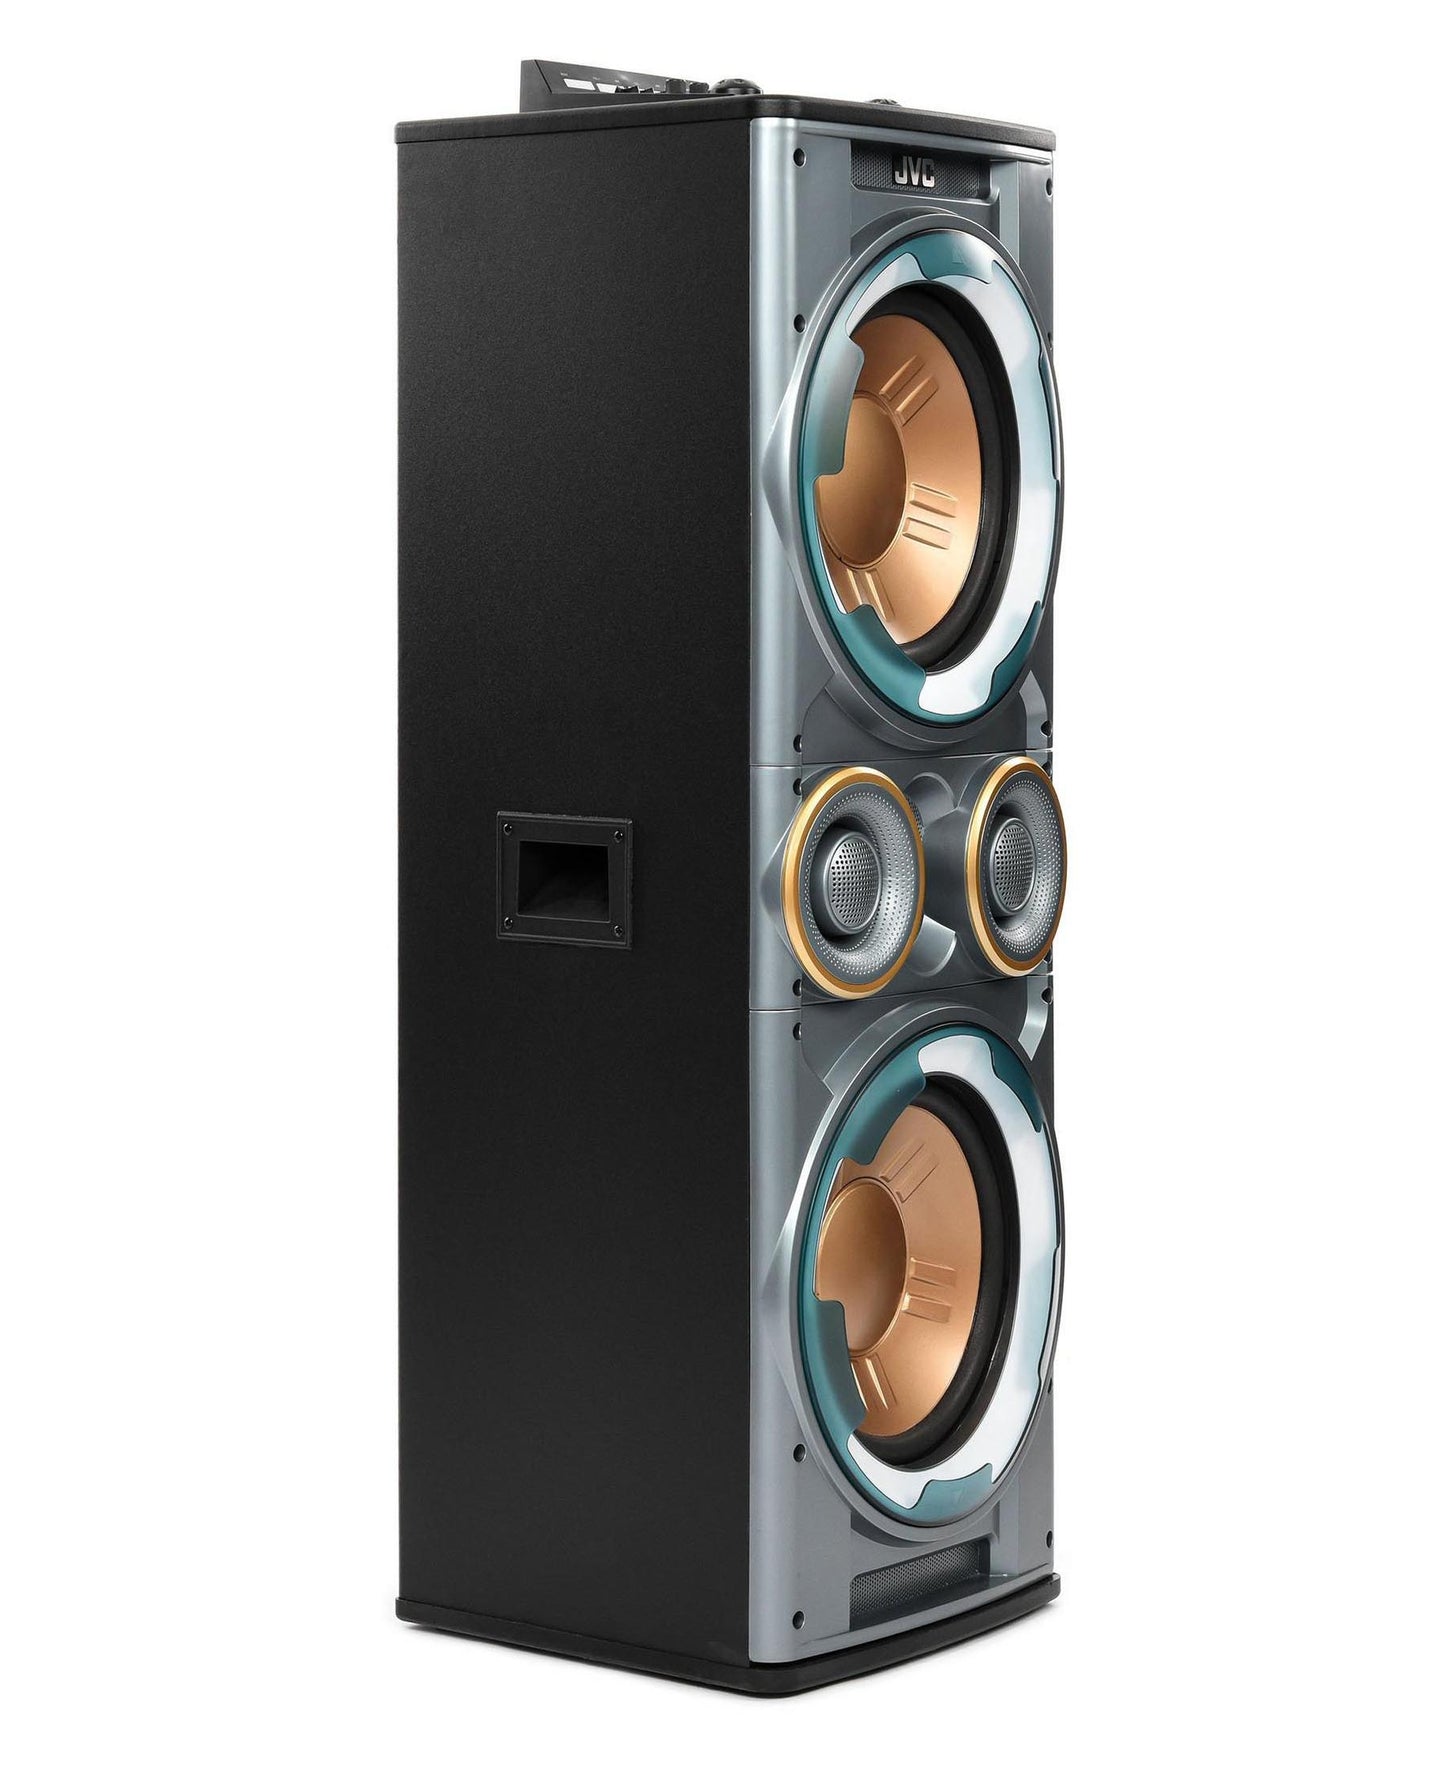 JVC Dual Active Speakers System